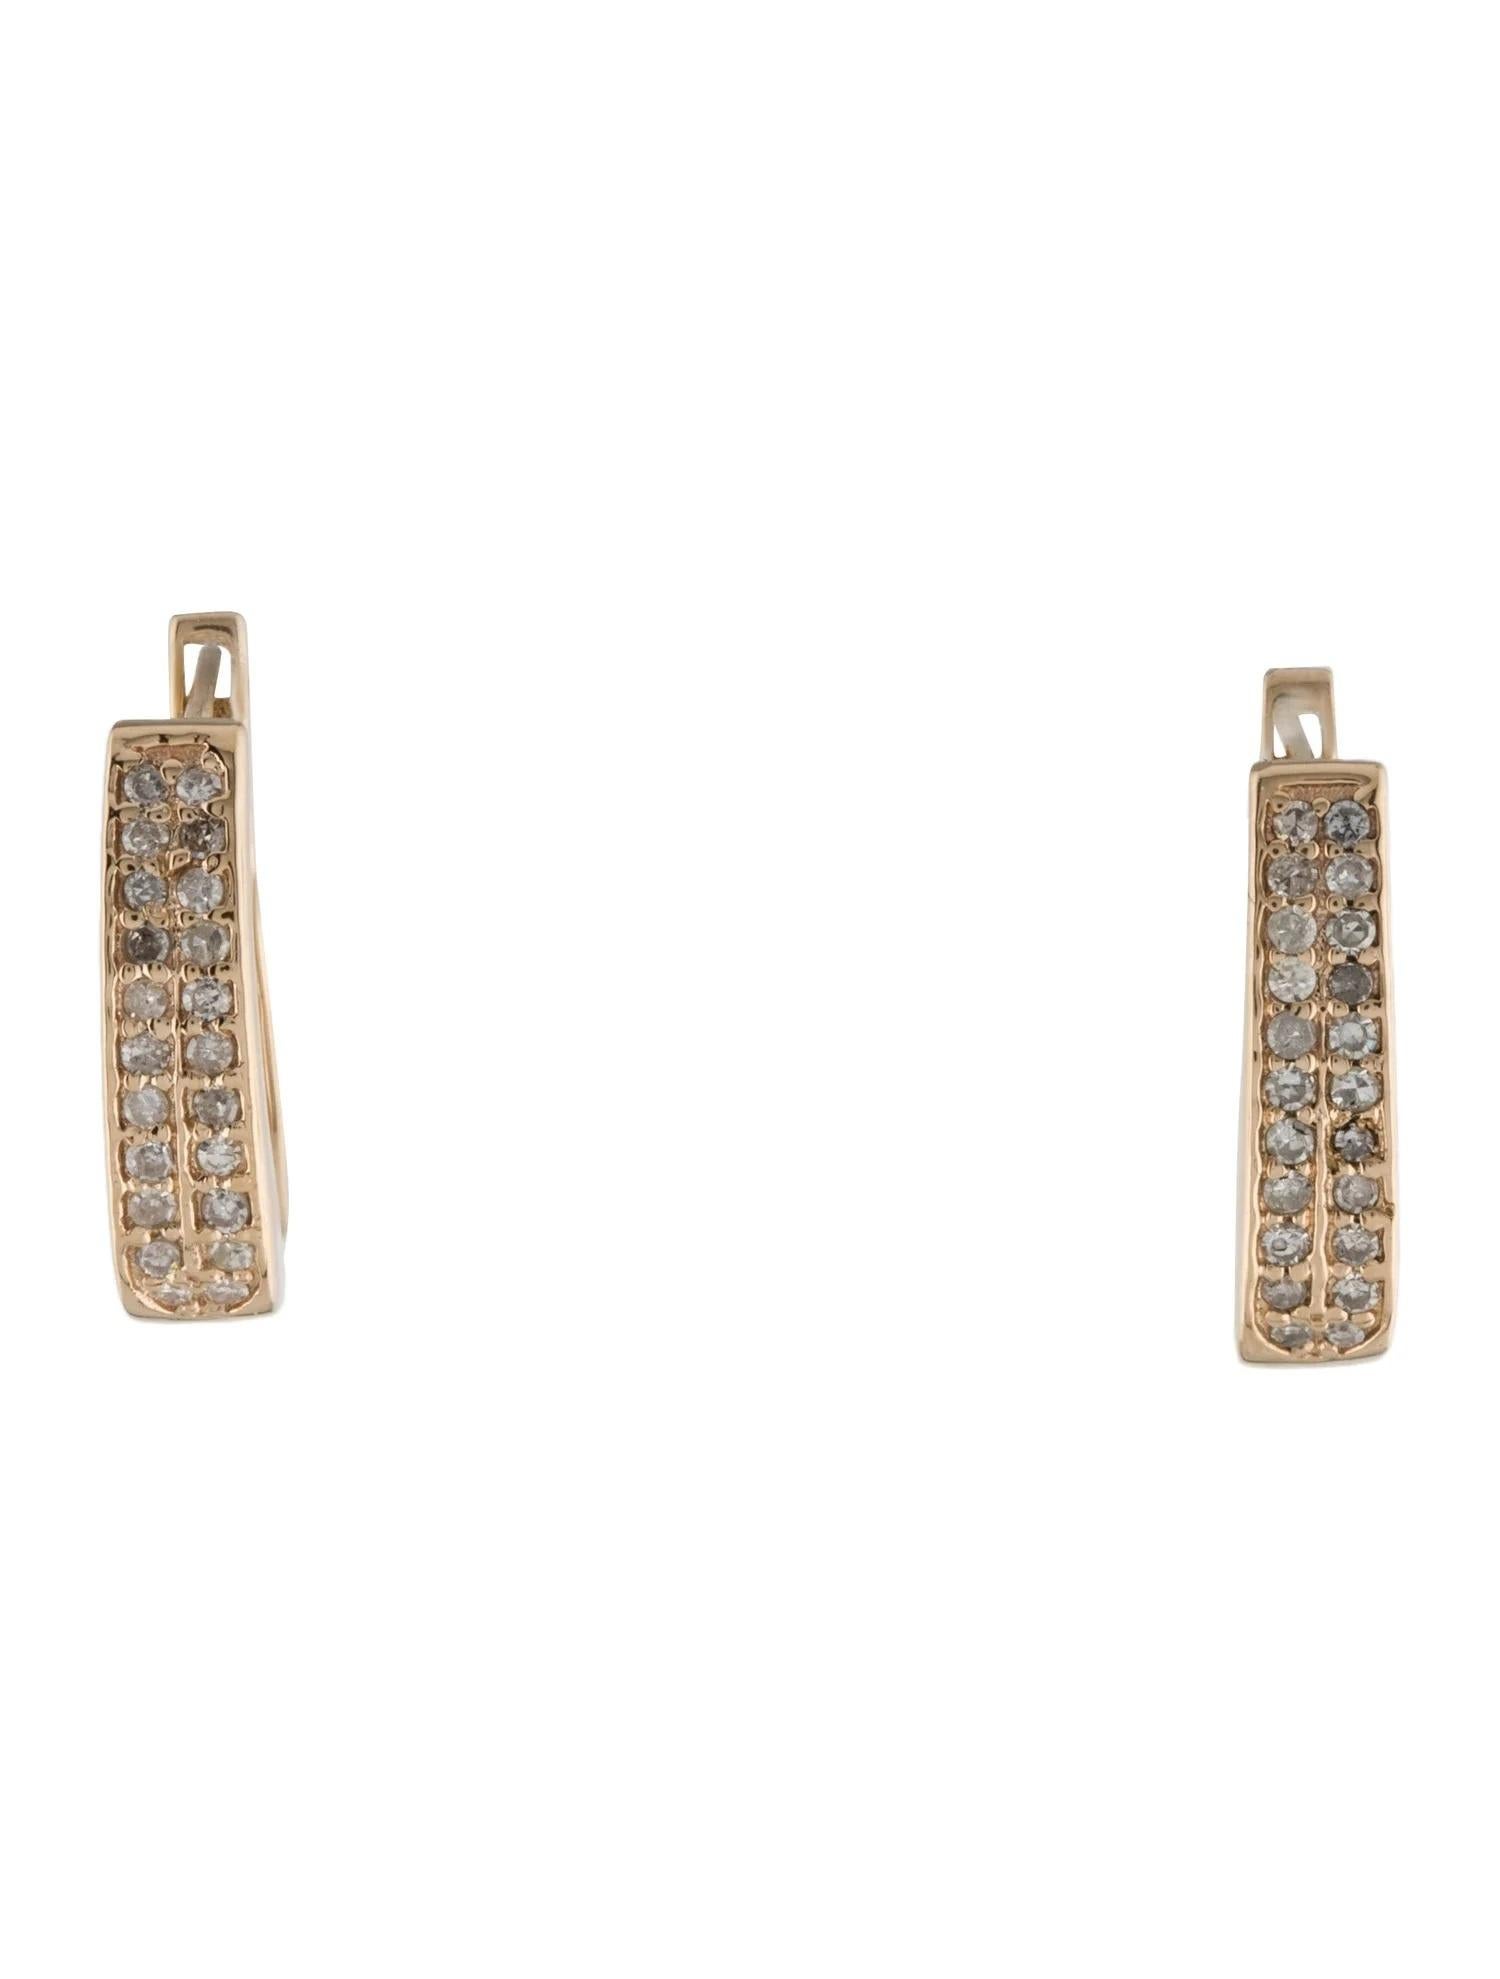 14K Diamond Hoop Earrings - Classic Yellow Gold, 0.27 Carat Single Cut Diamonds In New Condition For Sale In Holtsville, NY